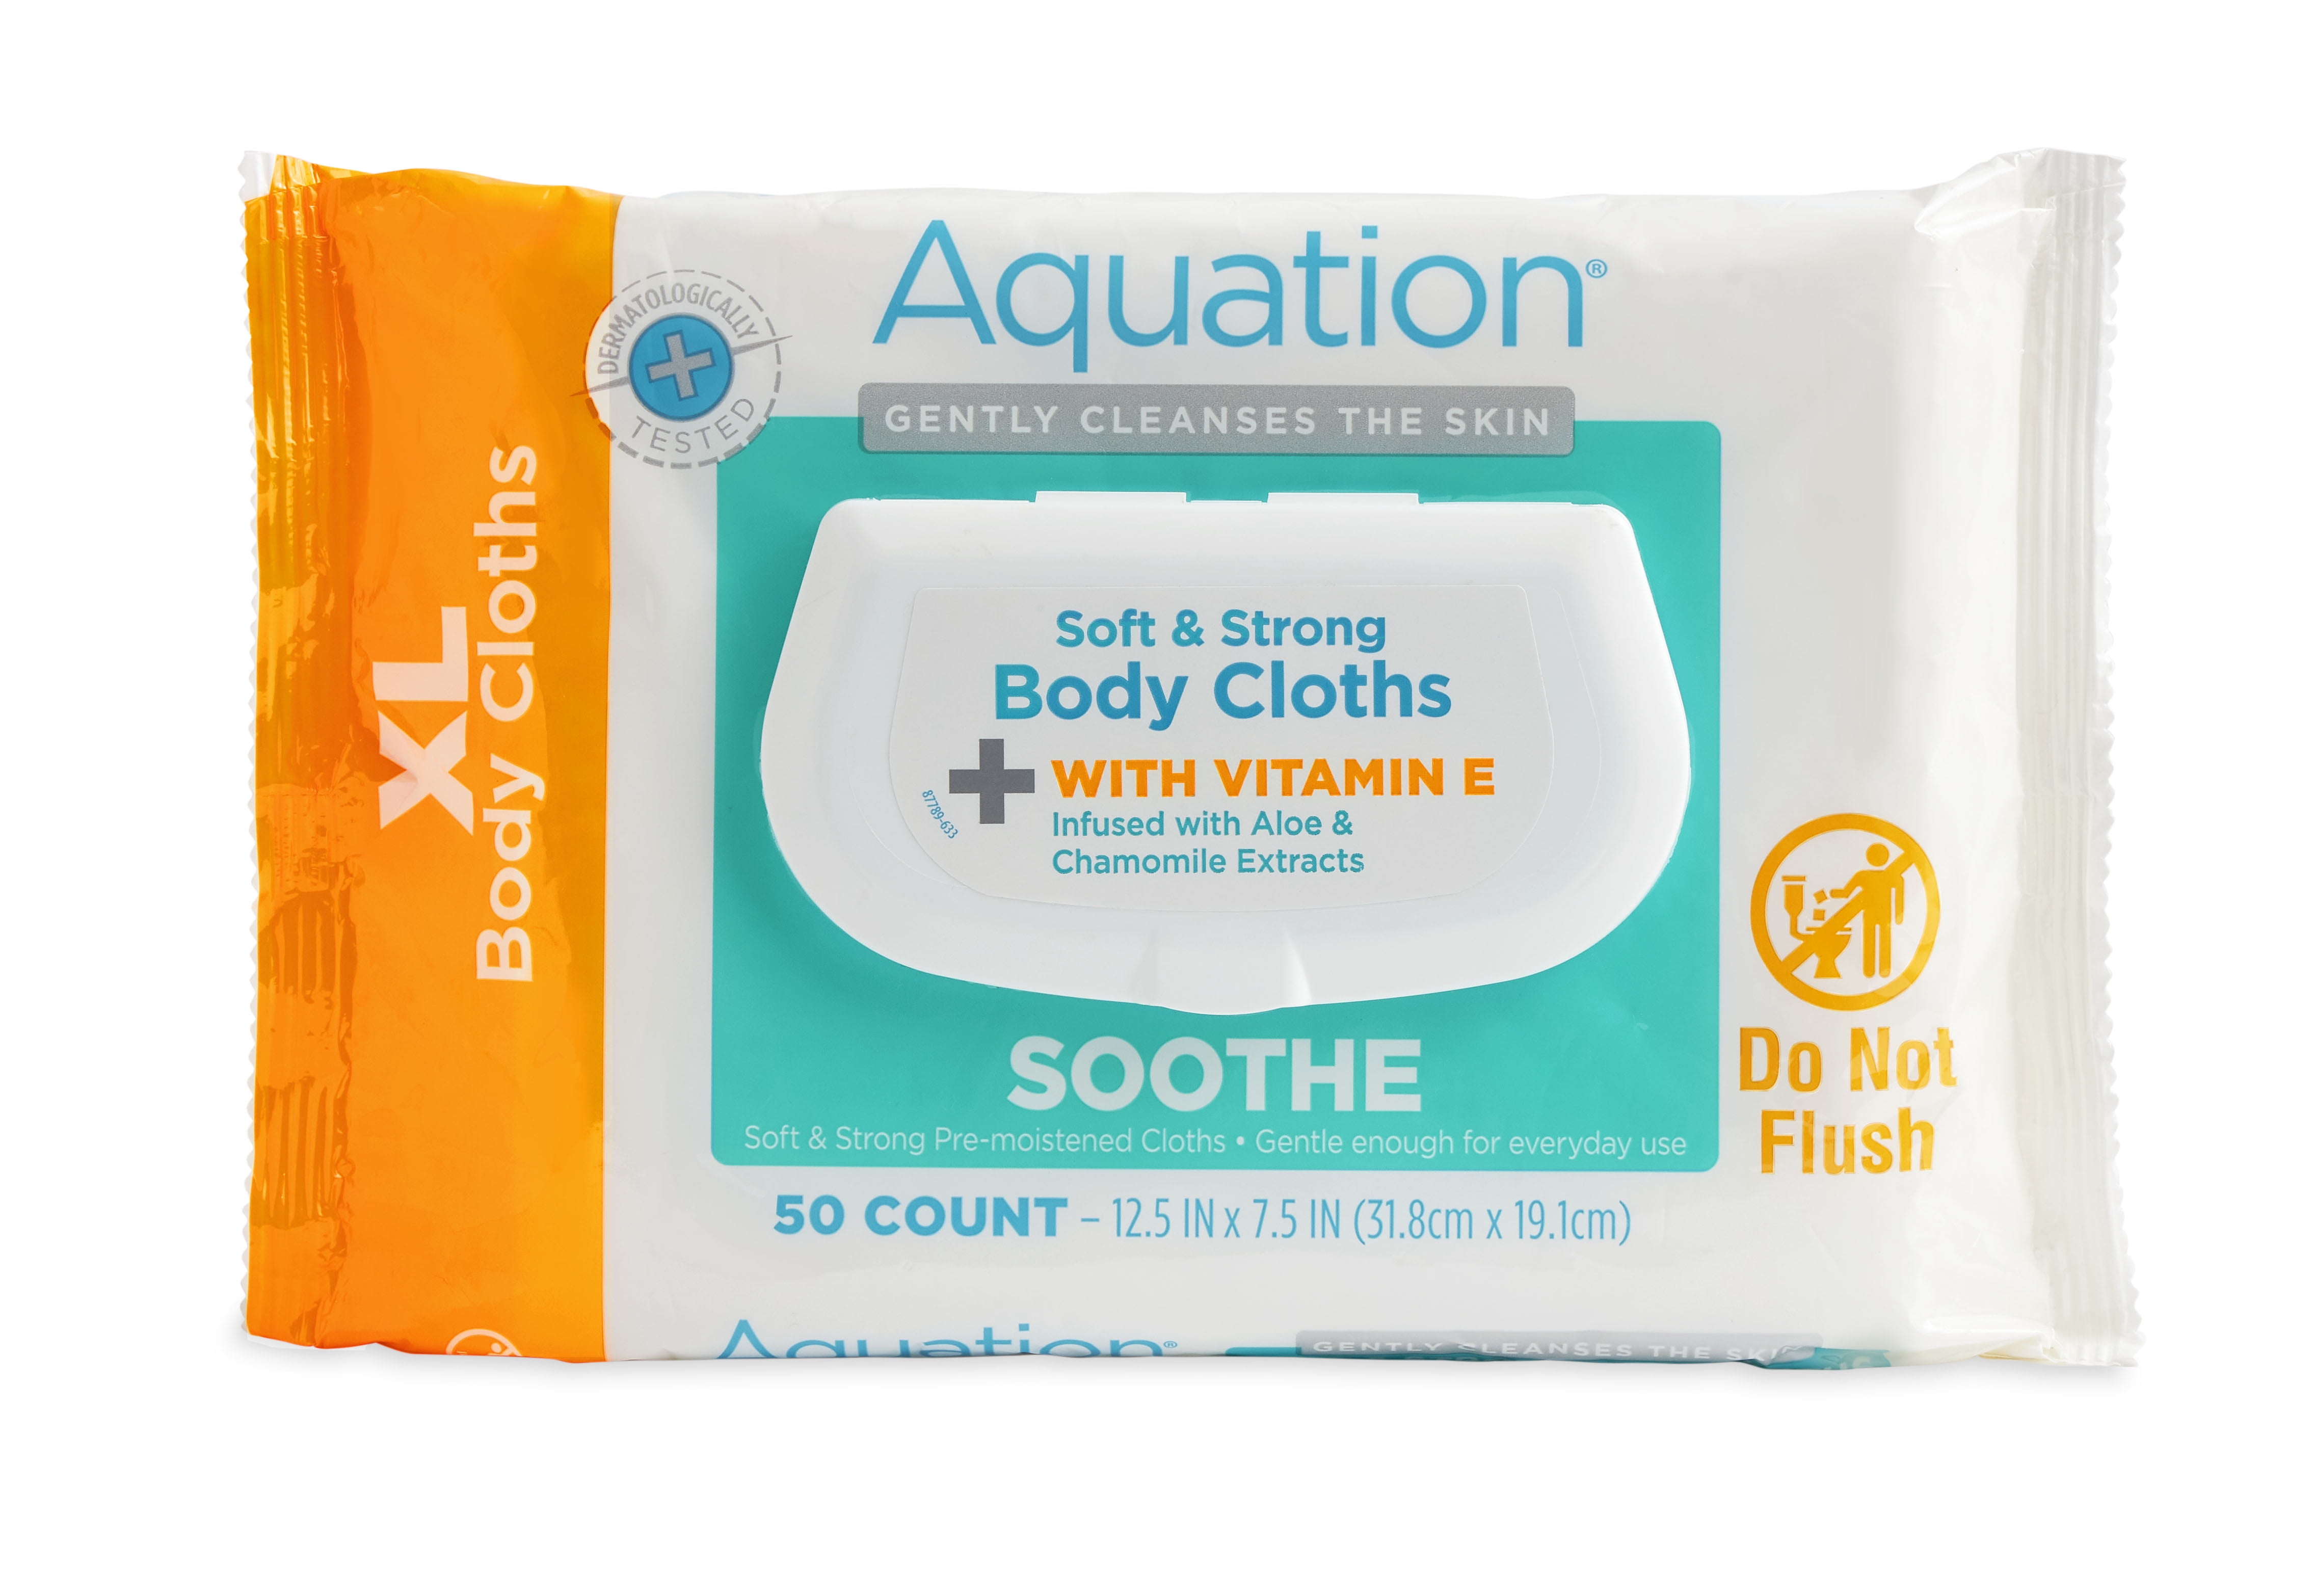 Aquation All Body XL Soft & Strong Body Cloths, 50 Count